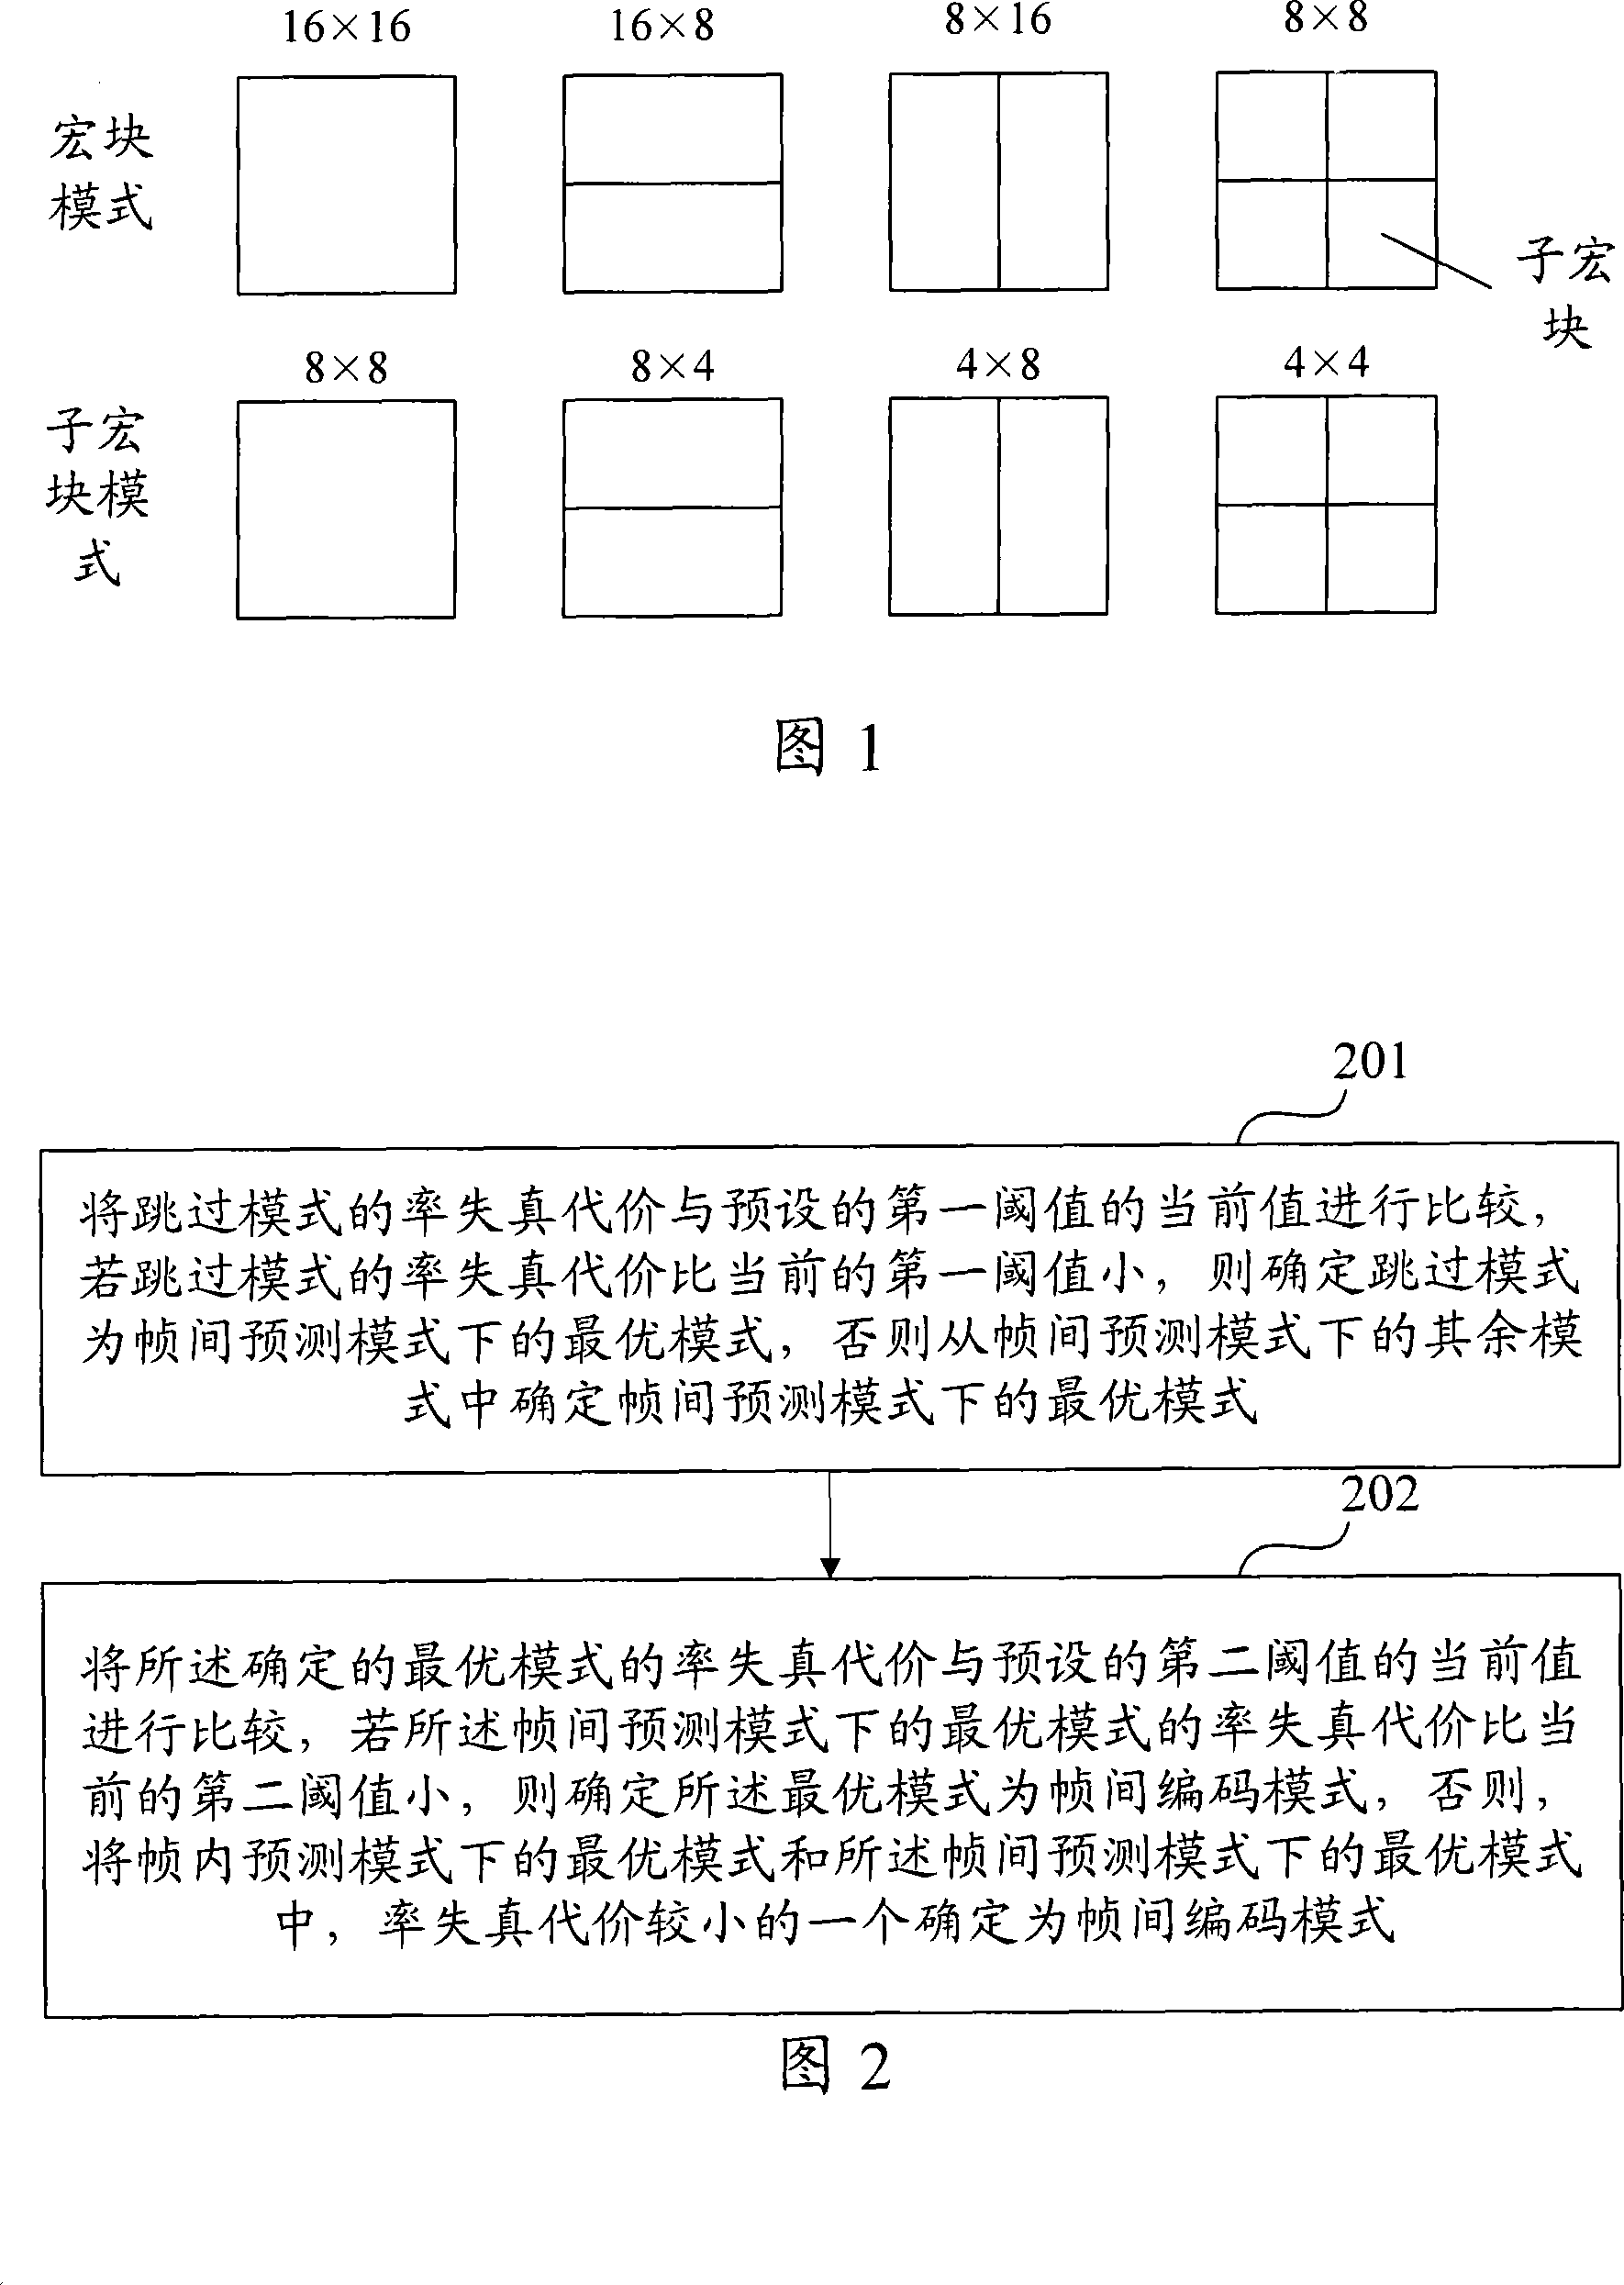 Method and apparatus for determining interframe encoding mode